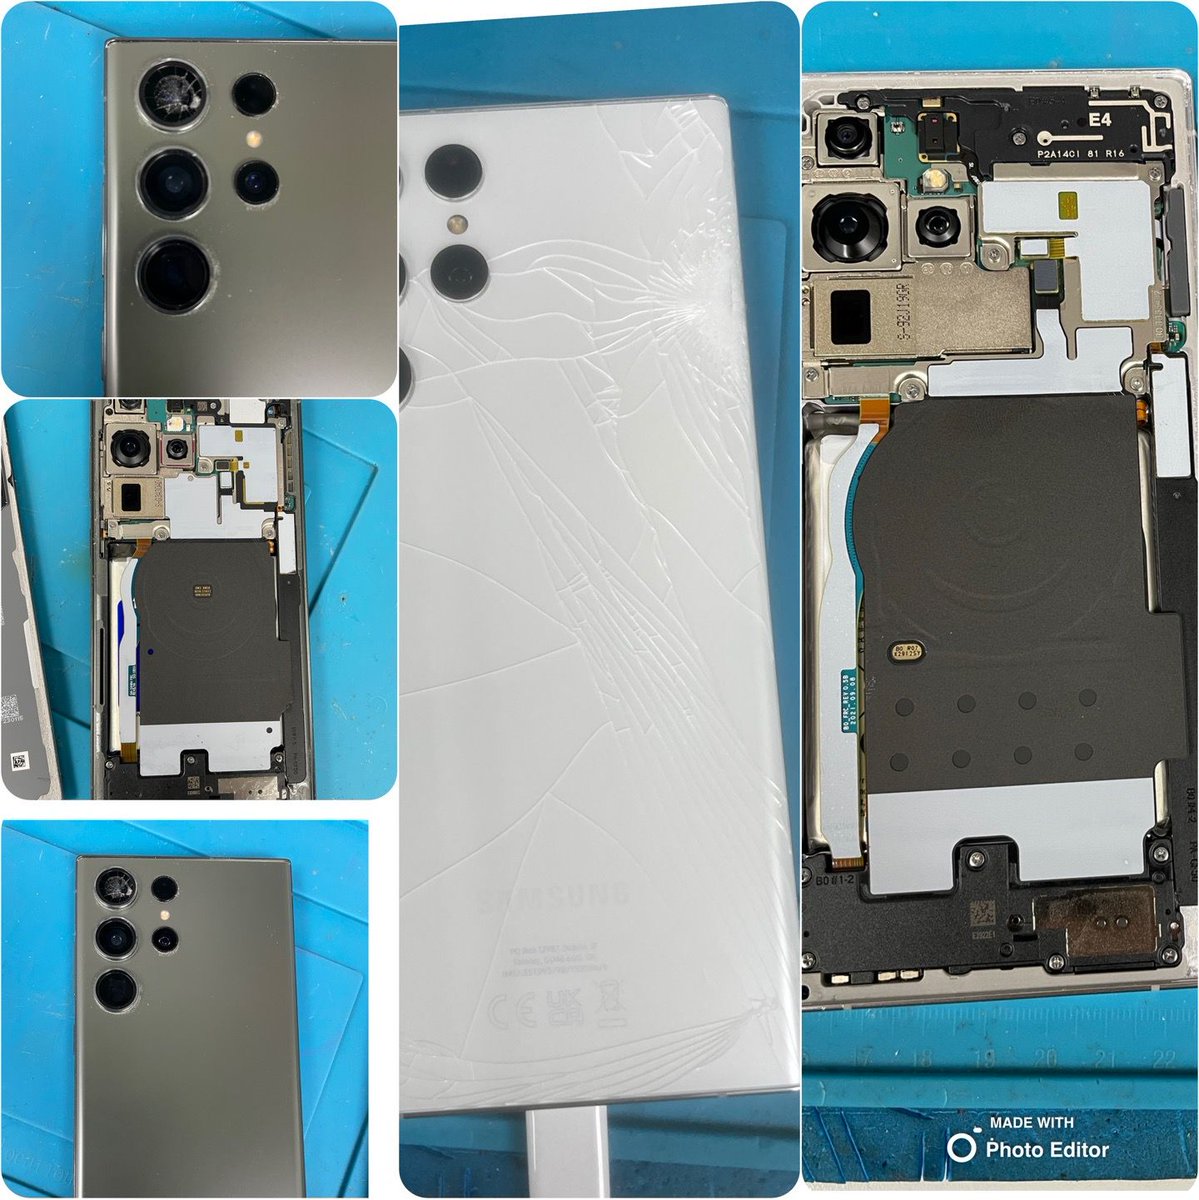 Gadget Clinic repairs all kinds of Samsung phone issues. Contact us if you face problems like broken screen, damaged charging port, liquid damage, speaker issues or performance issues. #samsungrepairs #gadgetclinic